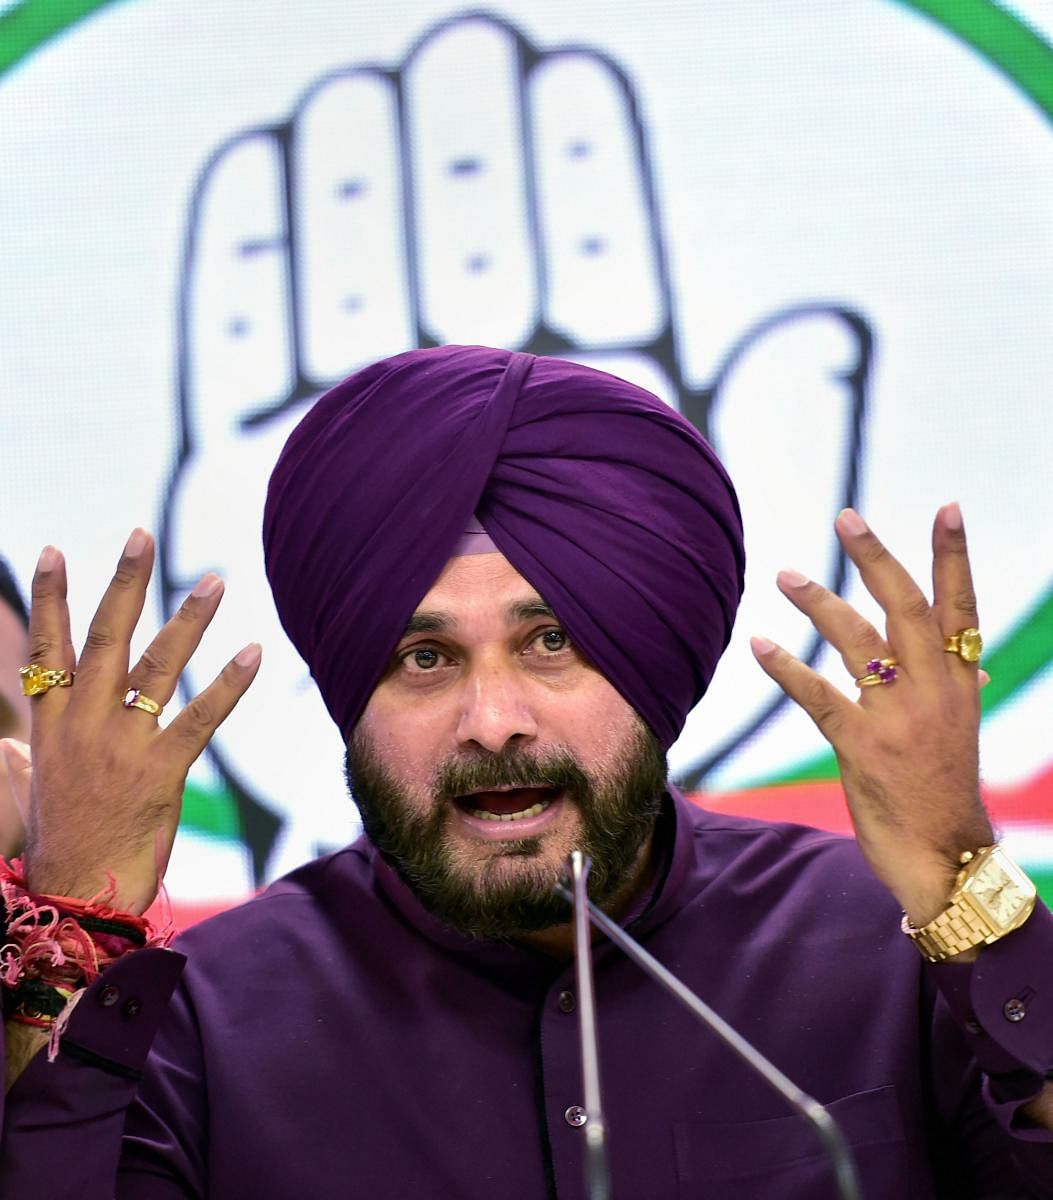 "While you are talking of Navjot Singh Sidhu, I must say nobody can deny the contribution he has made. It cannot be ignored," Jakhar said in response to a question that hoardings had surfaced in Amritsar, describing Sidhu as the "real hero" for making the corridor a reality. Photo/PTI